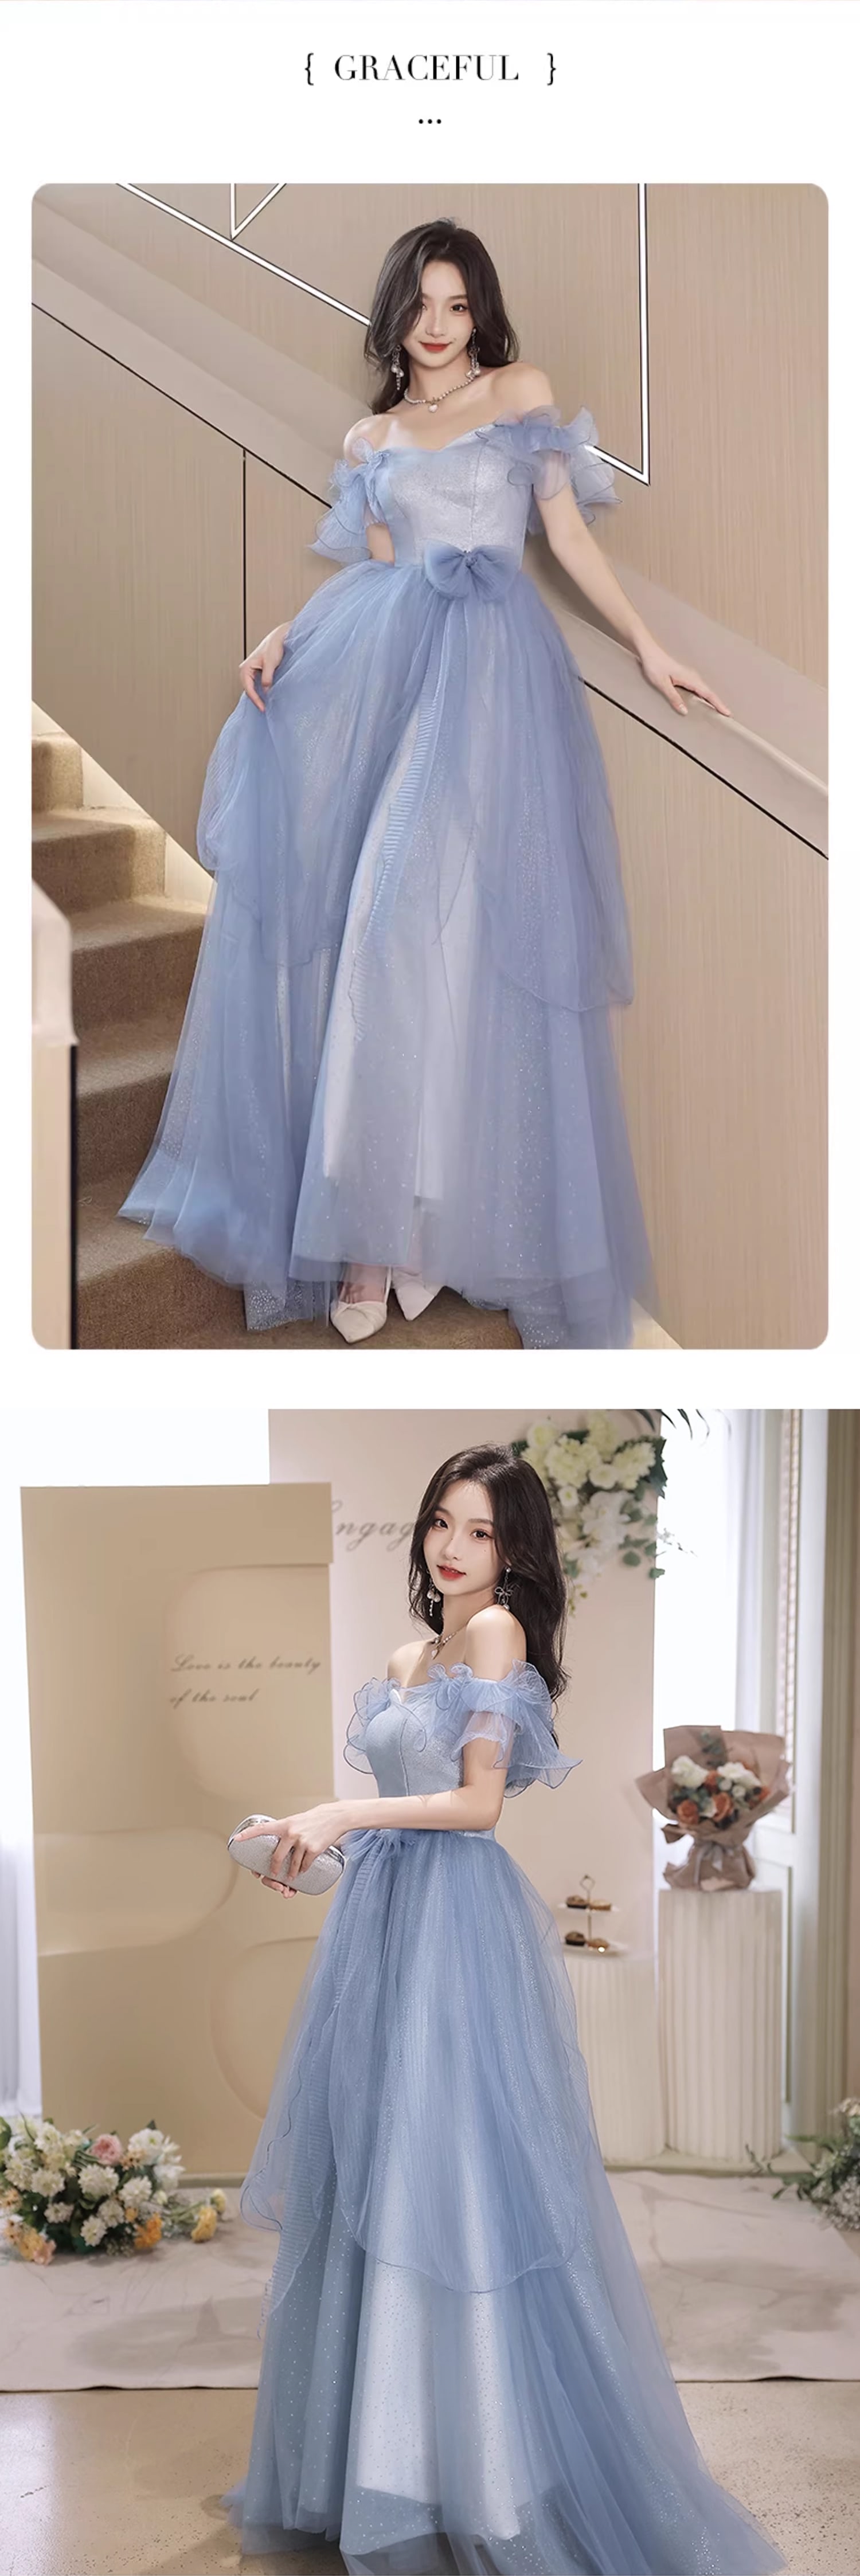 French-Stylish-Off-Shoulder-Blue-Tulle-Evening-Dress-Party-Gown-with-Bow11